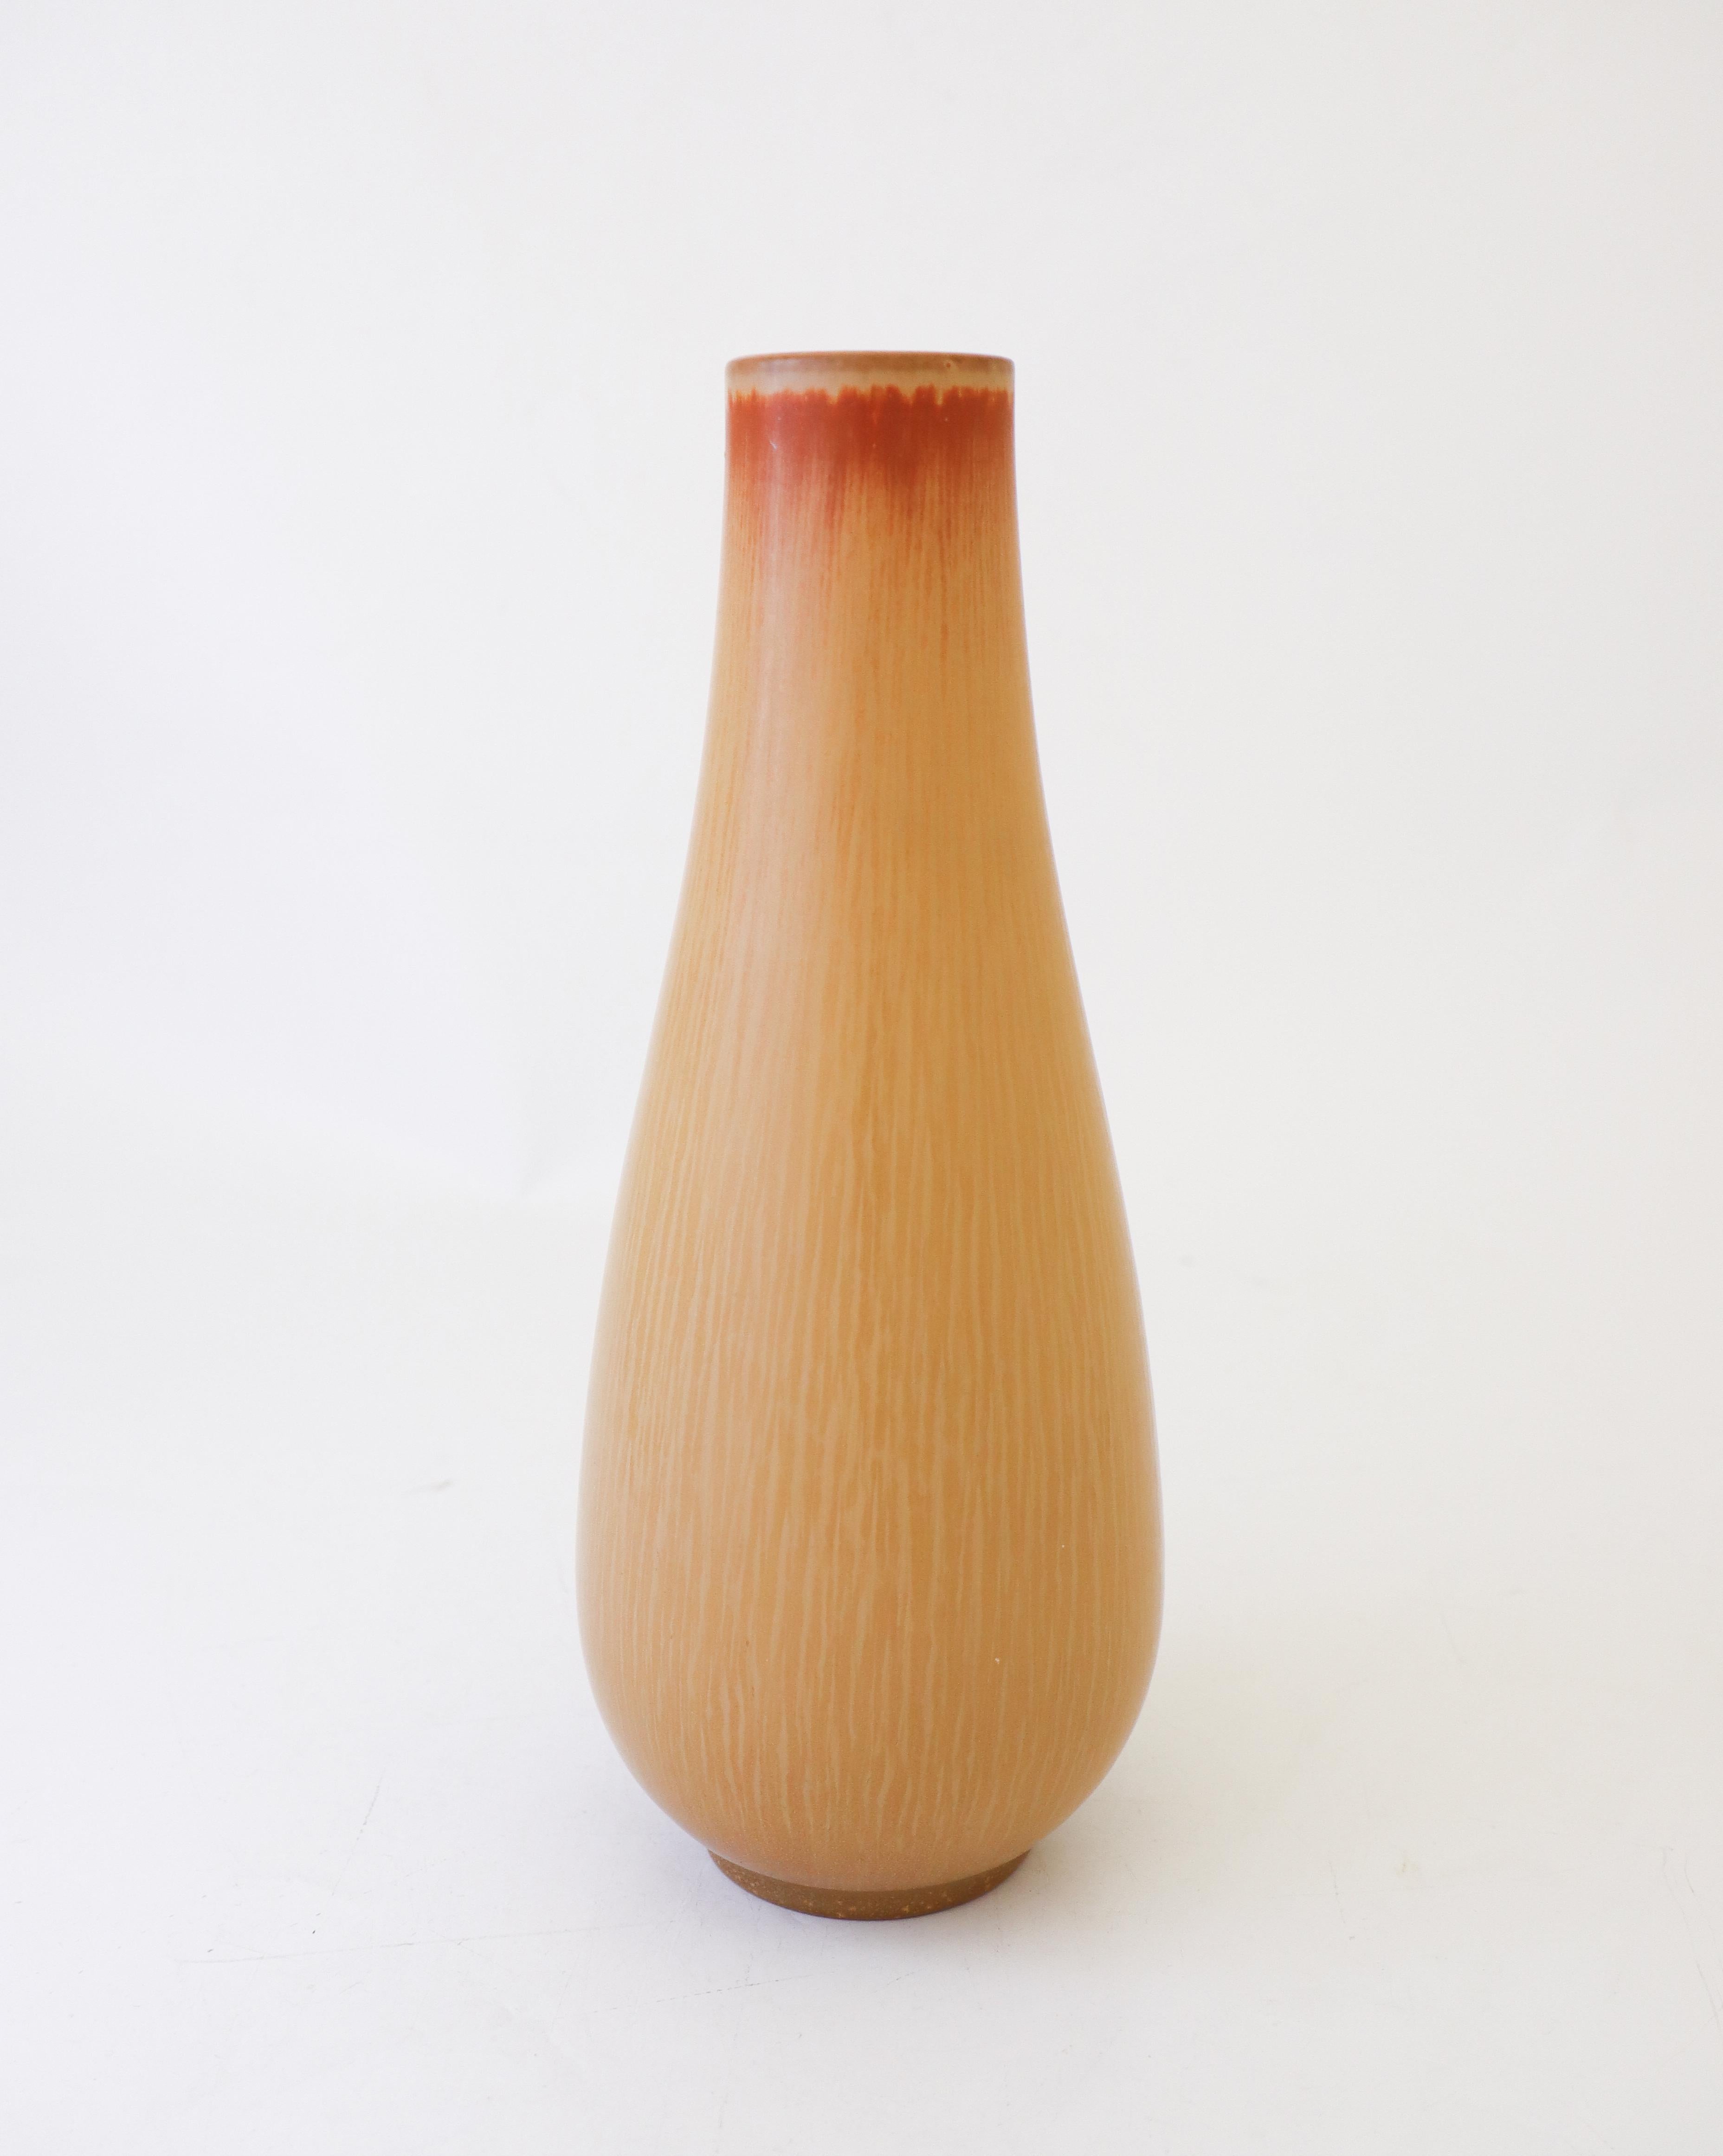 A lovely dark yellow vase designed by Gunnar Nylund at Rörstrand, the vase is 27.5 cm (11